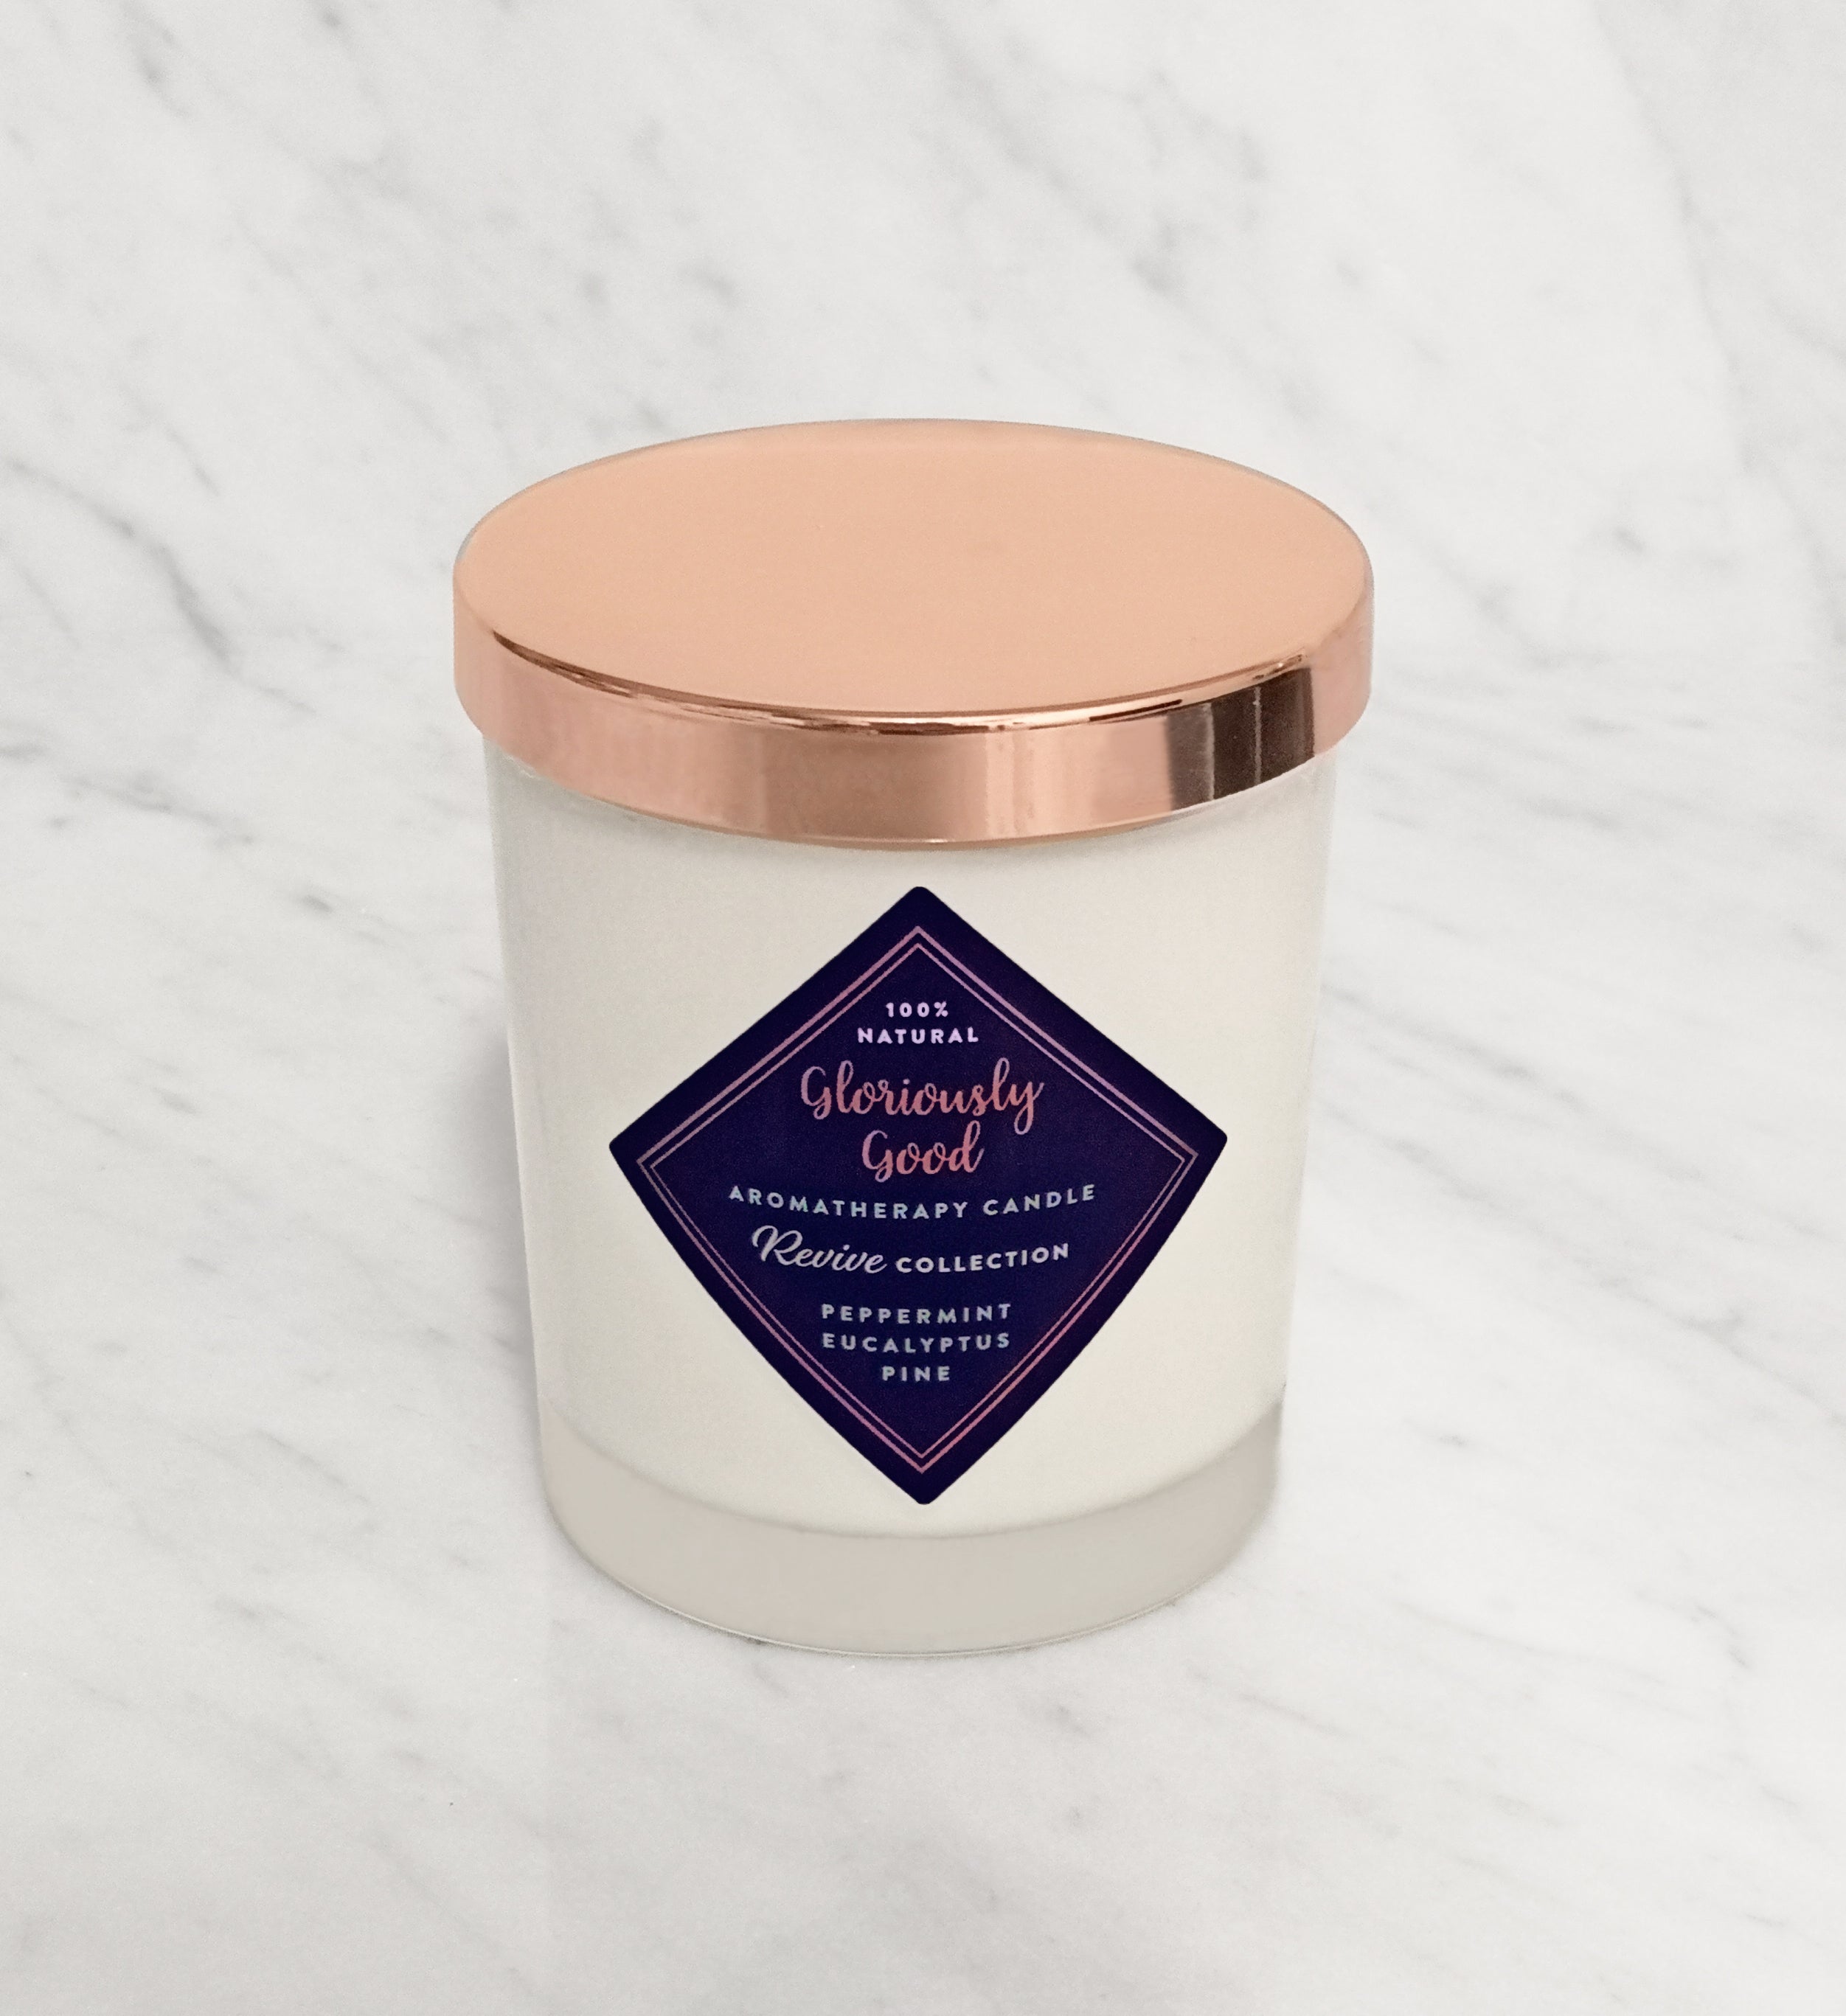 Peppermint, Eucalyptus and Pine aromatherapy candle with rose gold lid hand poured natural soy wax with essential oils